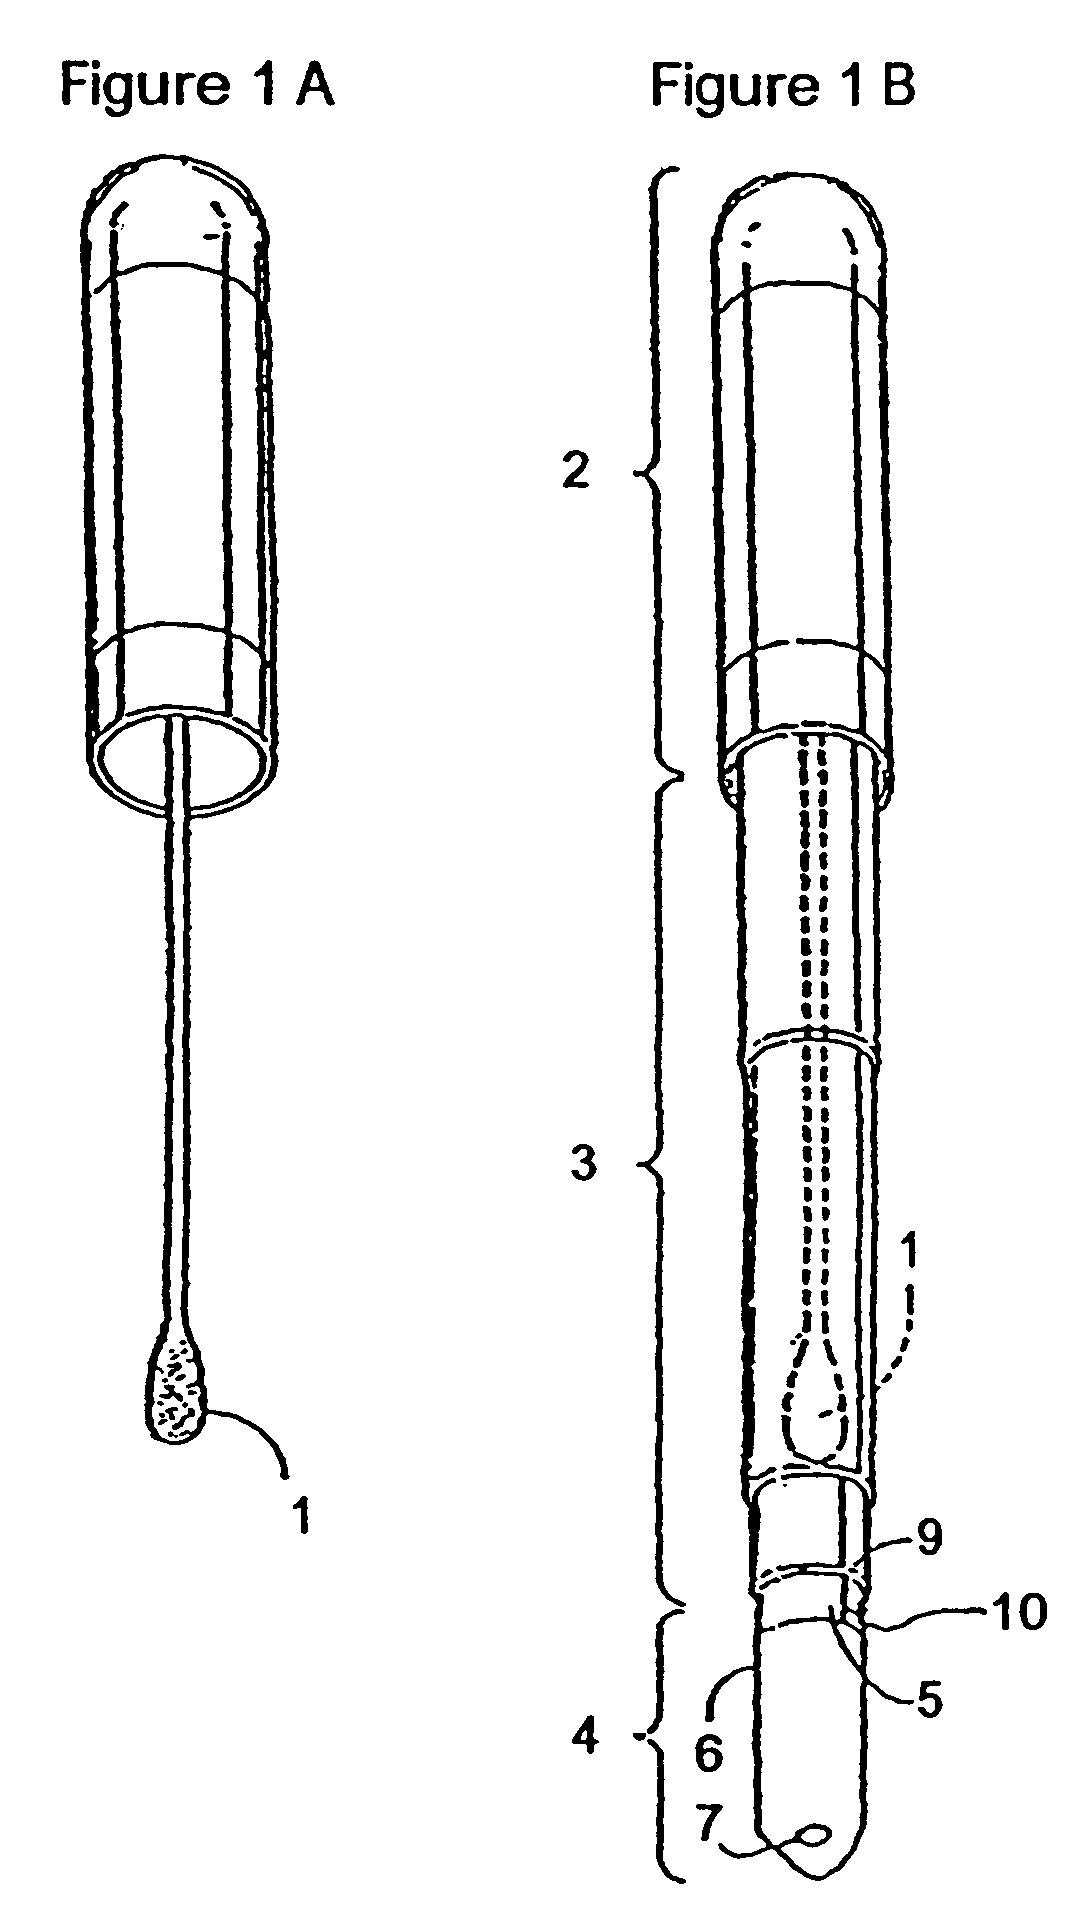 Method of determining allergenic food on surfaces